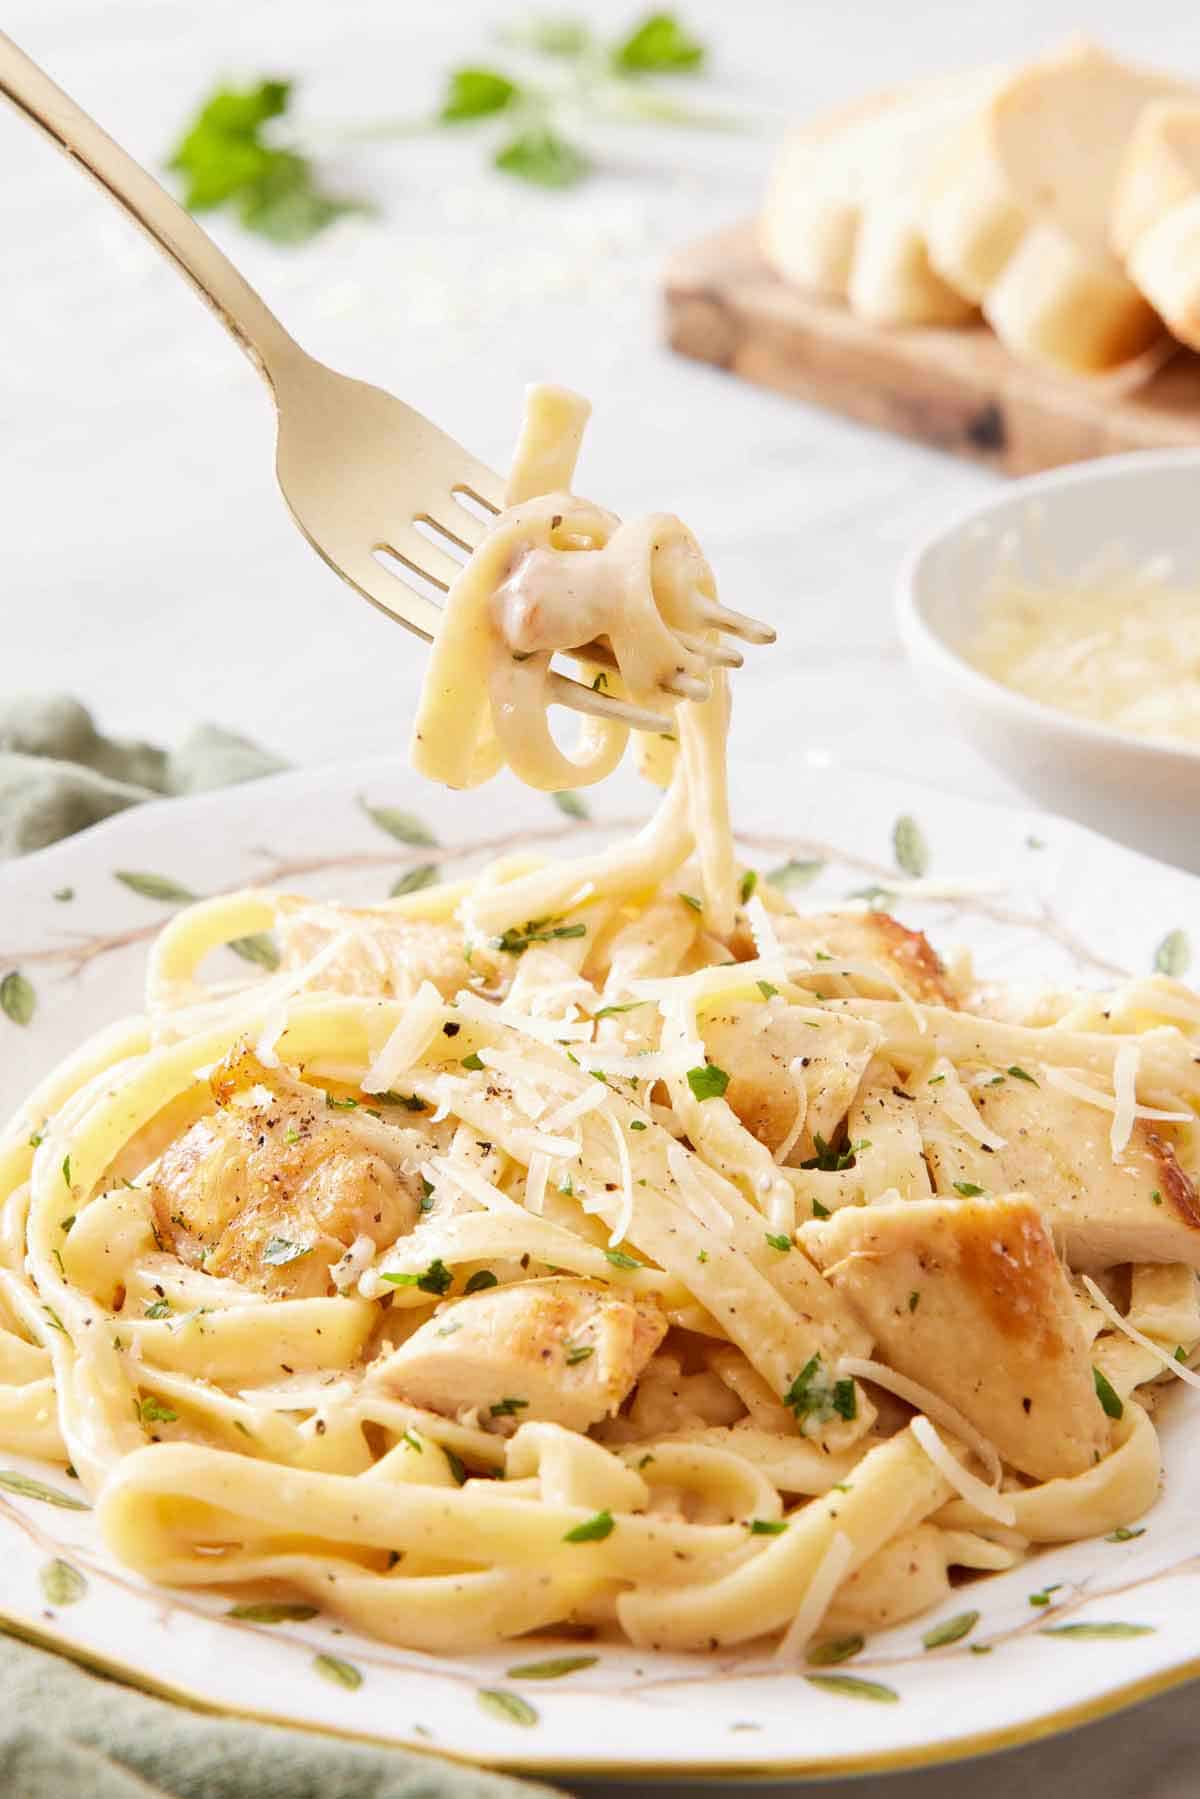 A fork lifting up a bite of Instant Pot chicken alfredo from a plate.